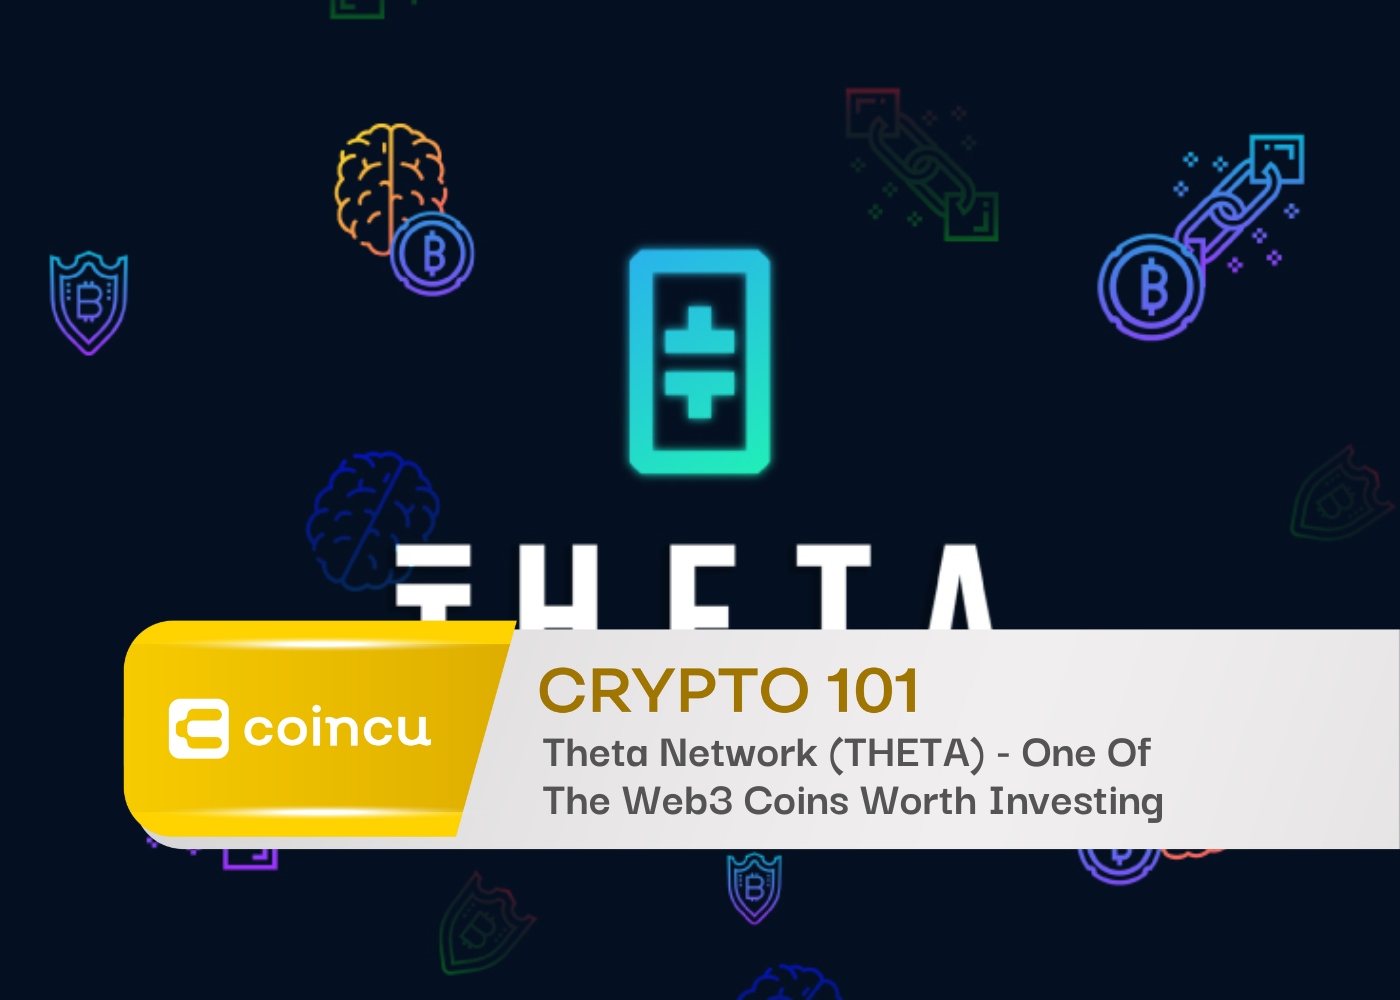 Theta Network (THETA) - One Of The Web3 Coins Worth Investing